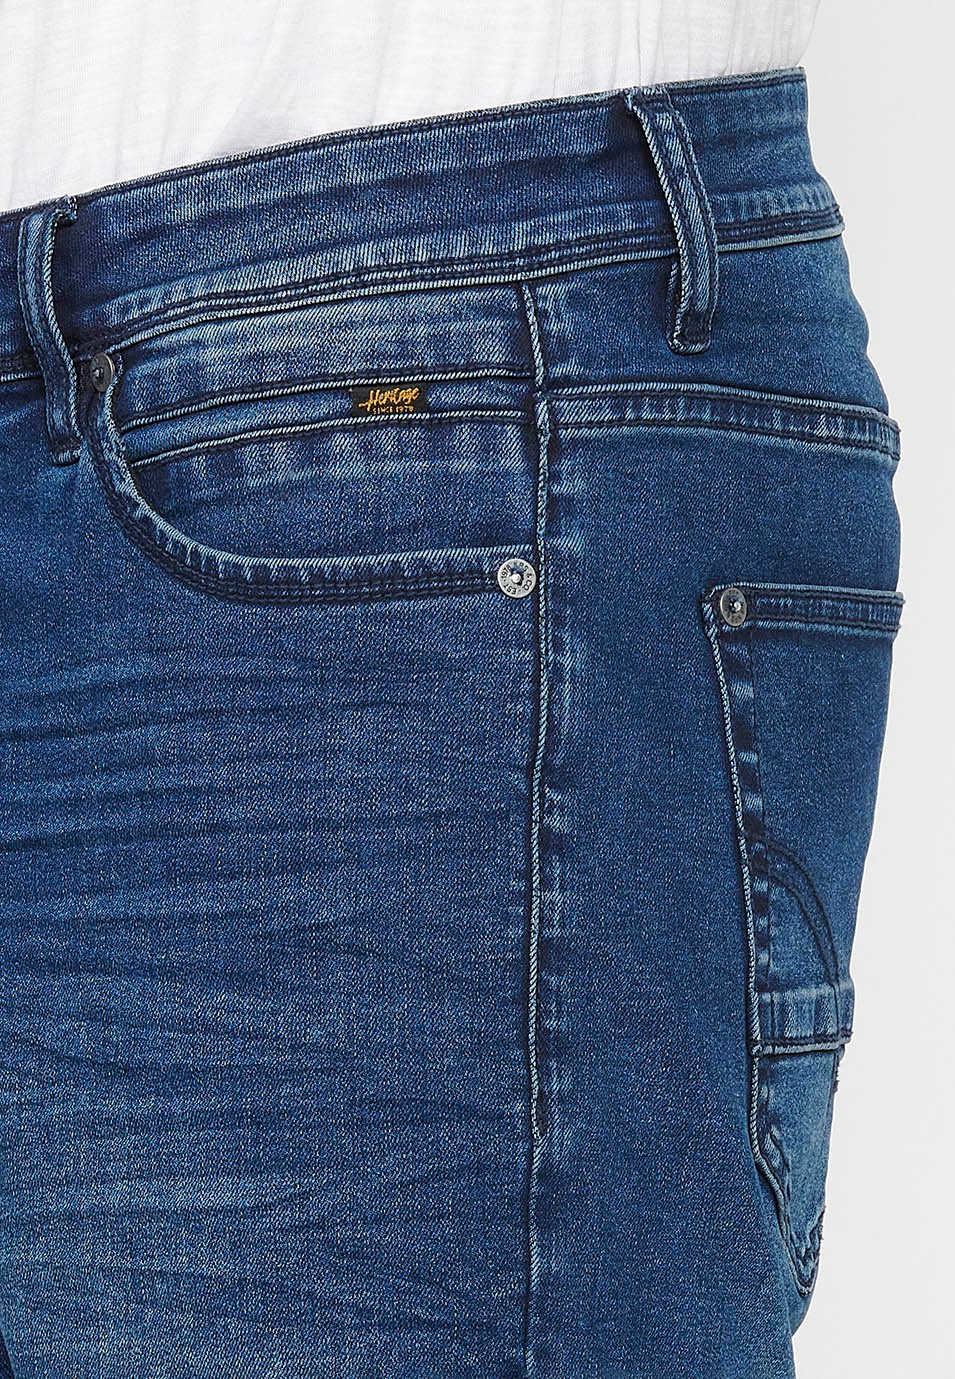 Denim shorts with front zipper and button closure and five pockets, one blue color pocket for Men